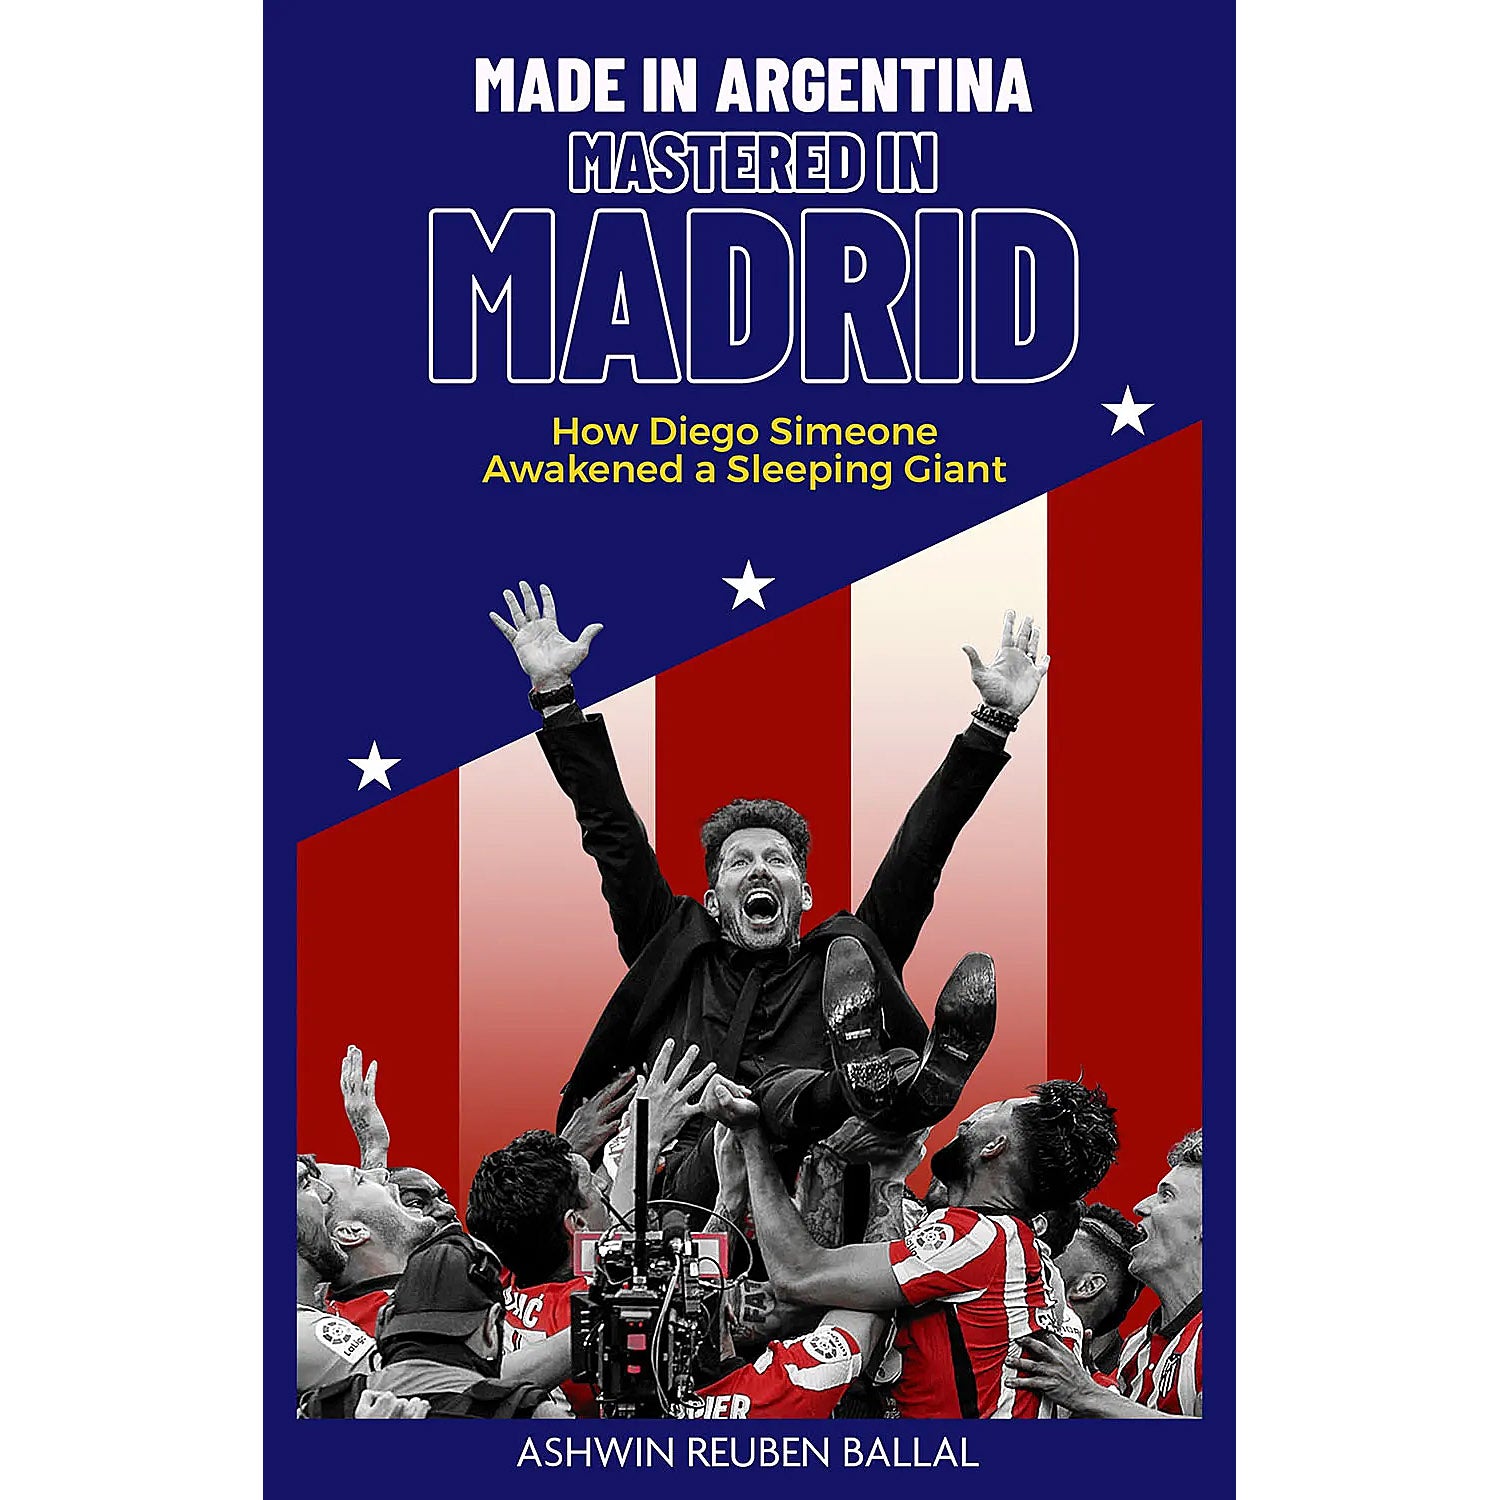 Made in Argentina – Mastered in Madrid – How Diego Simeone Awakened a Sleeping Giant